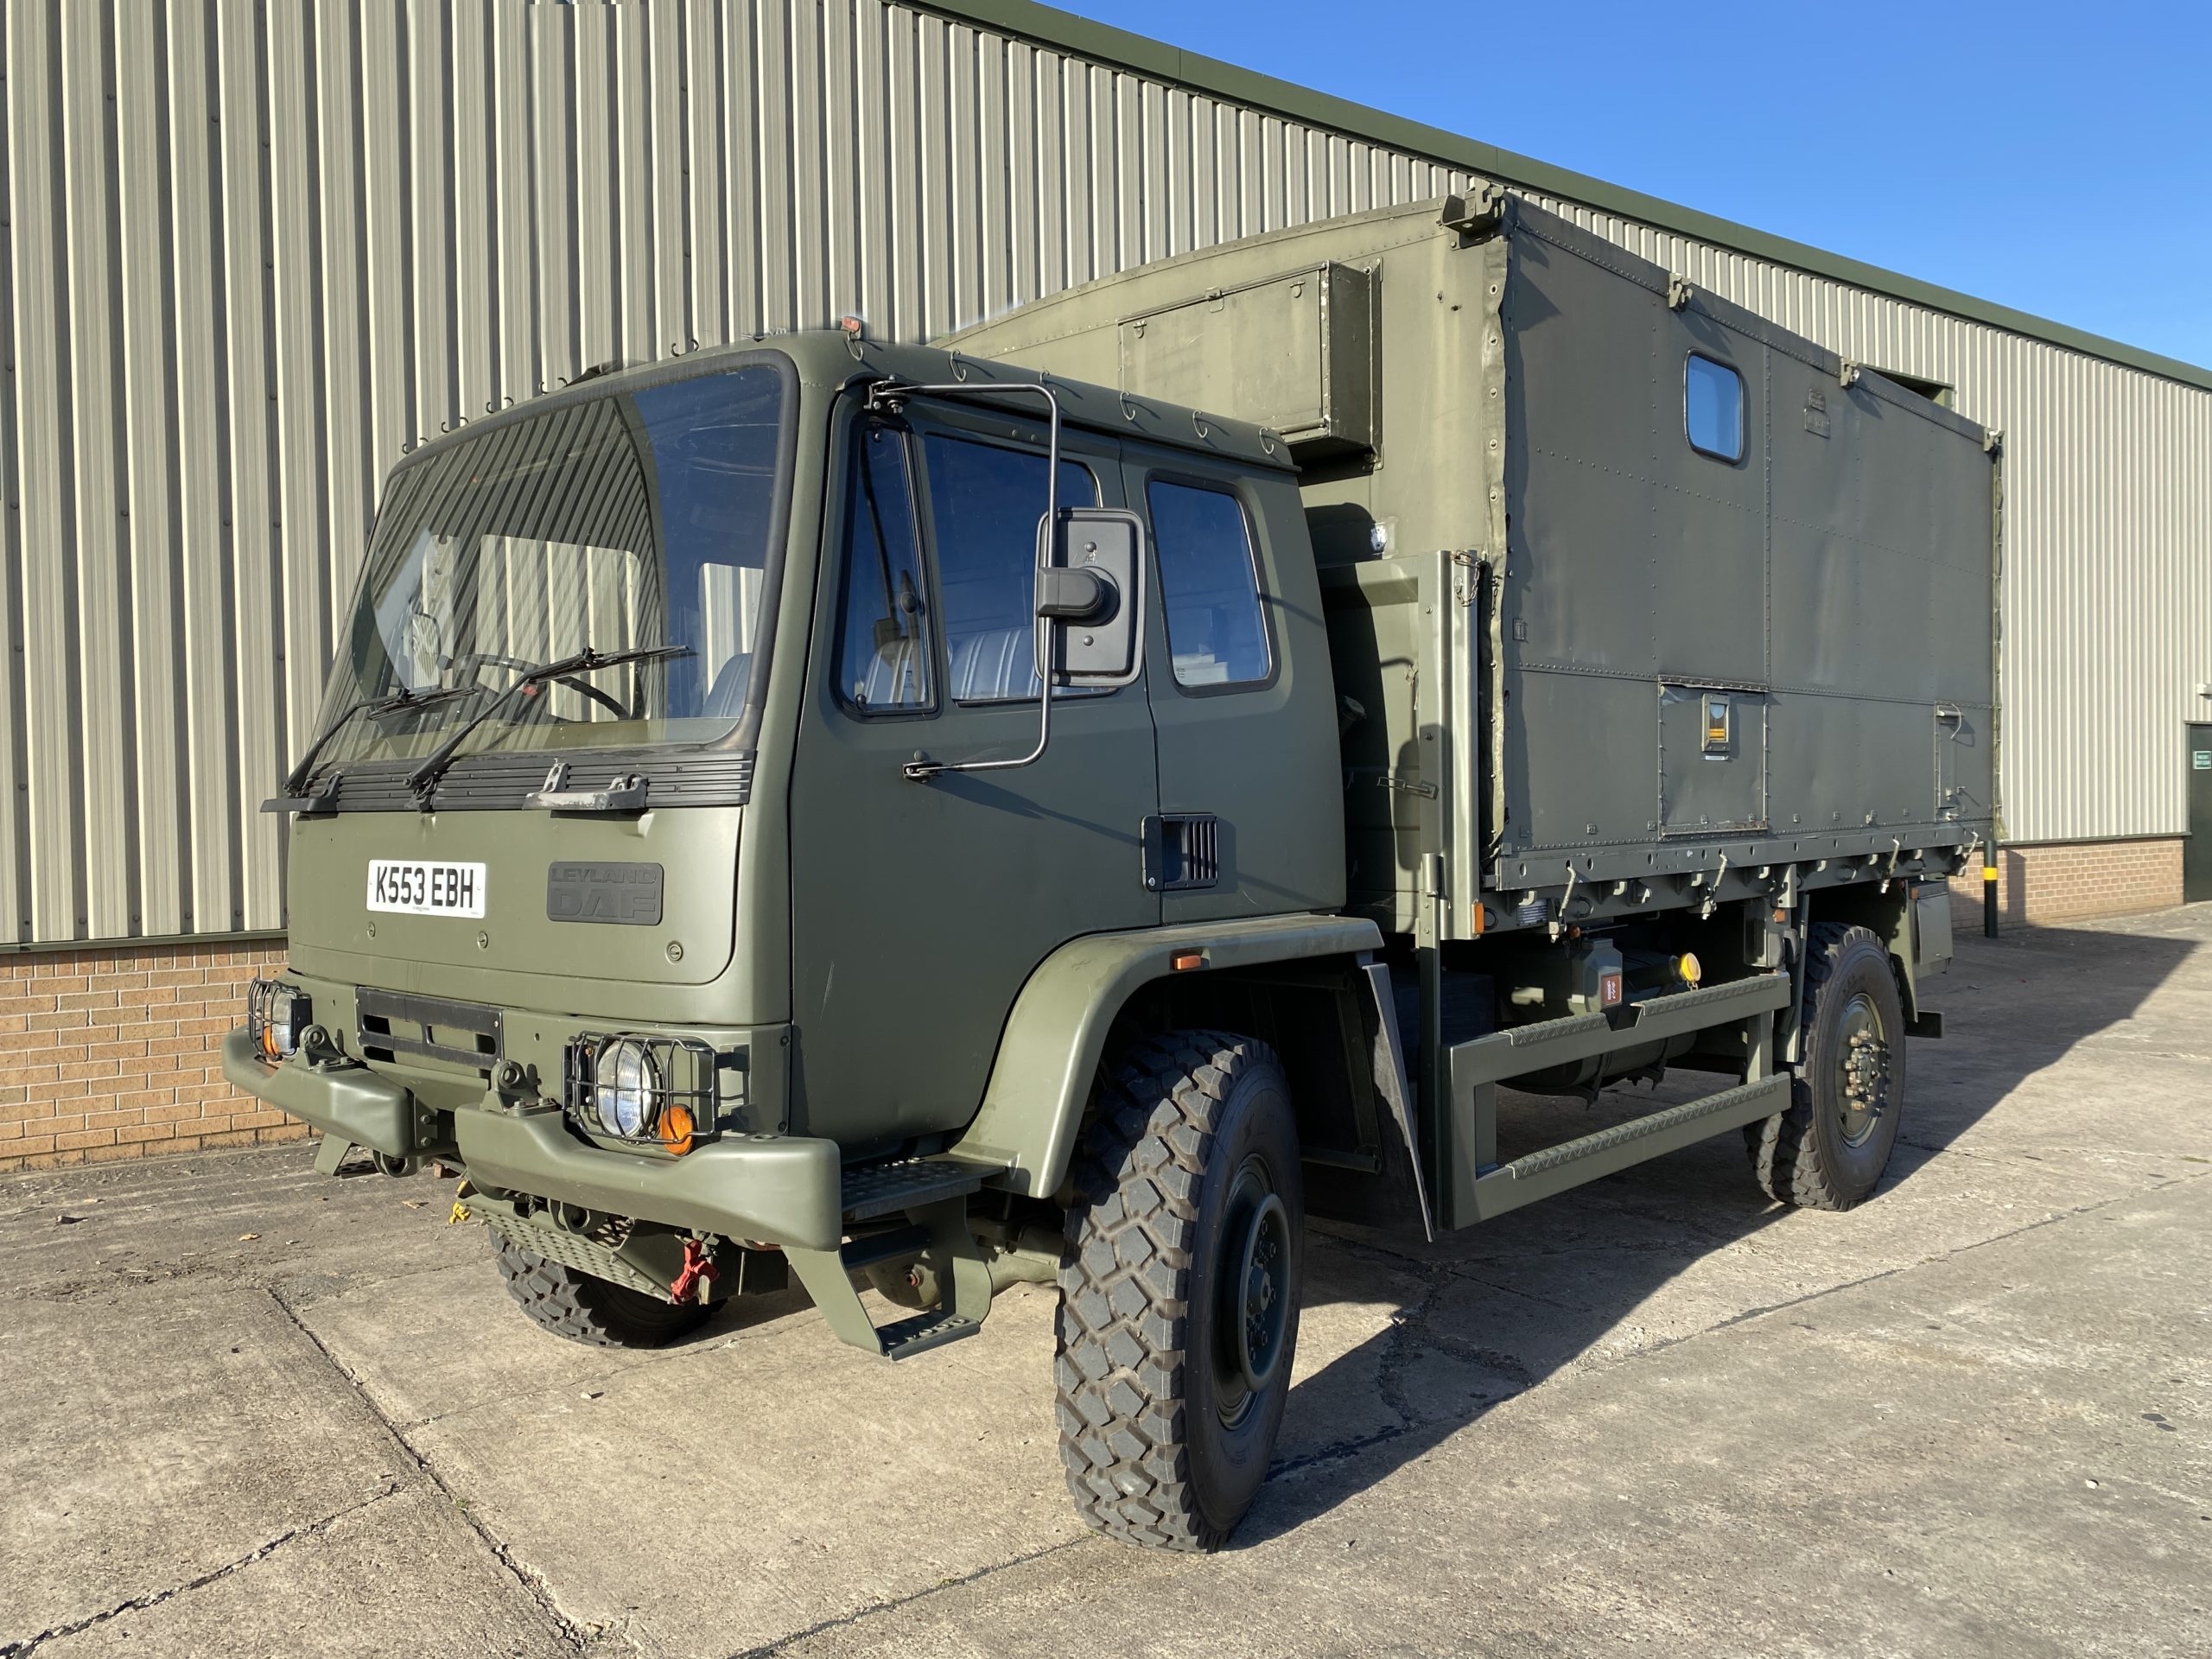 military vehicles for sale - Leyland Daf 4x4 Box Truck Road Registered